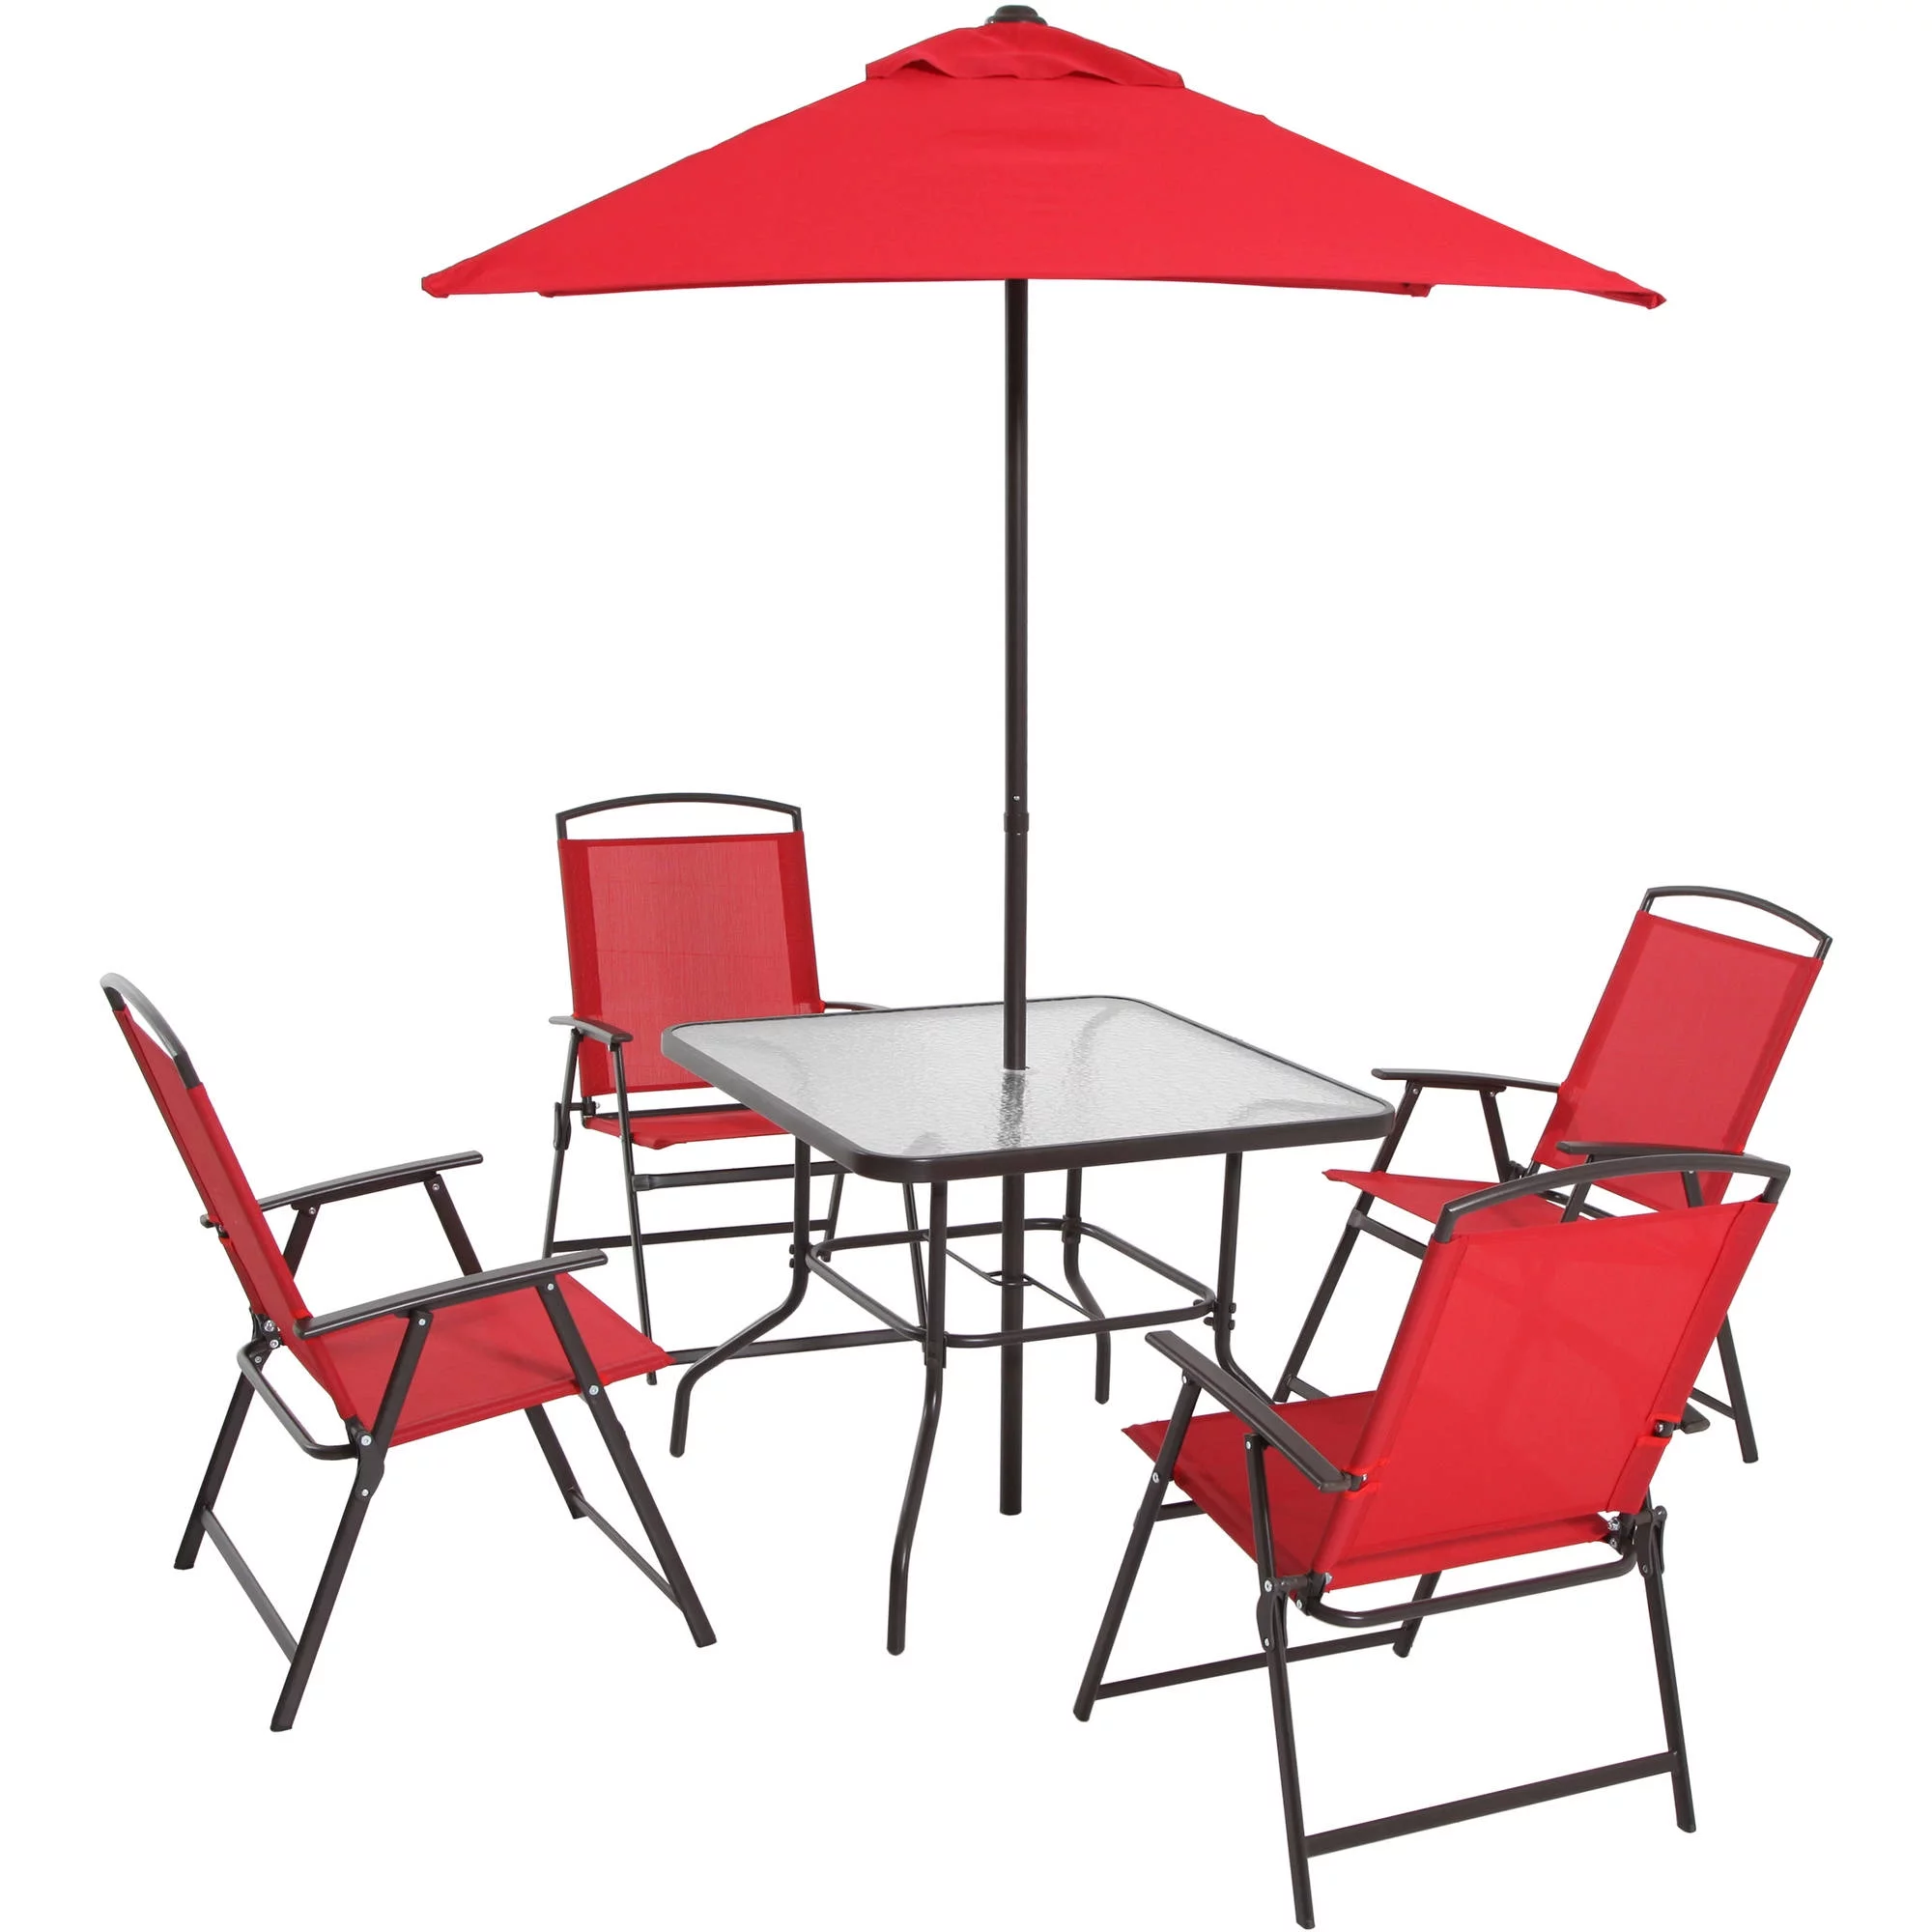 Mainstays Albany Lane 6-Piece Outdoor Patio Dining Set, Red/Black